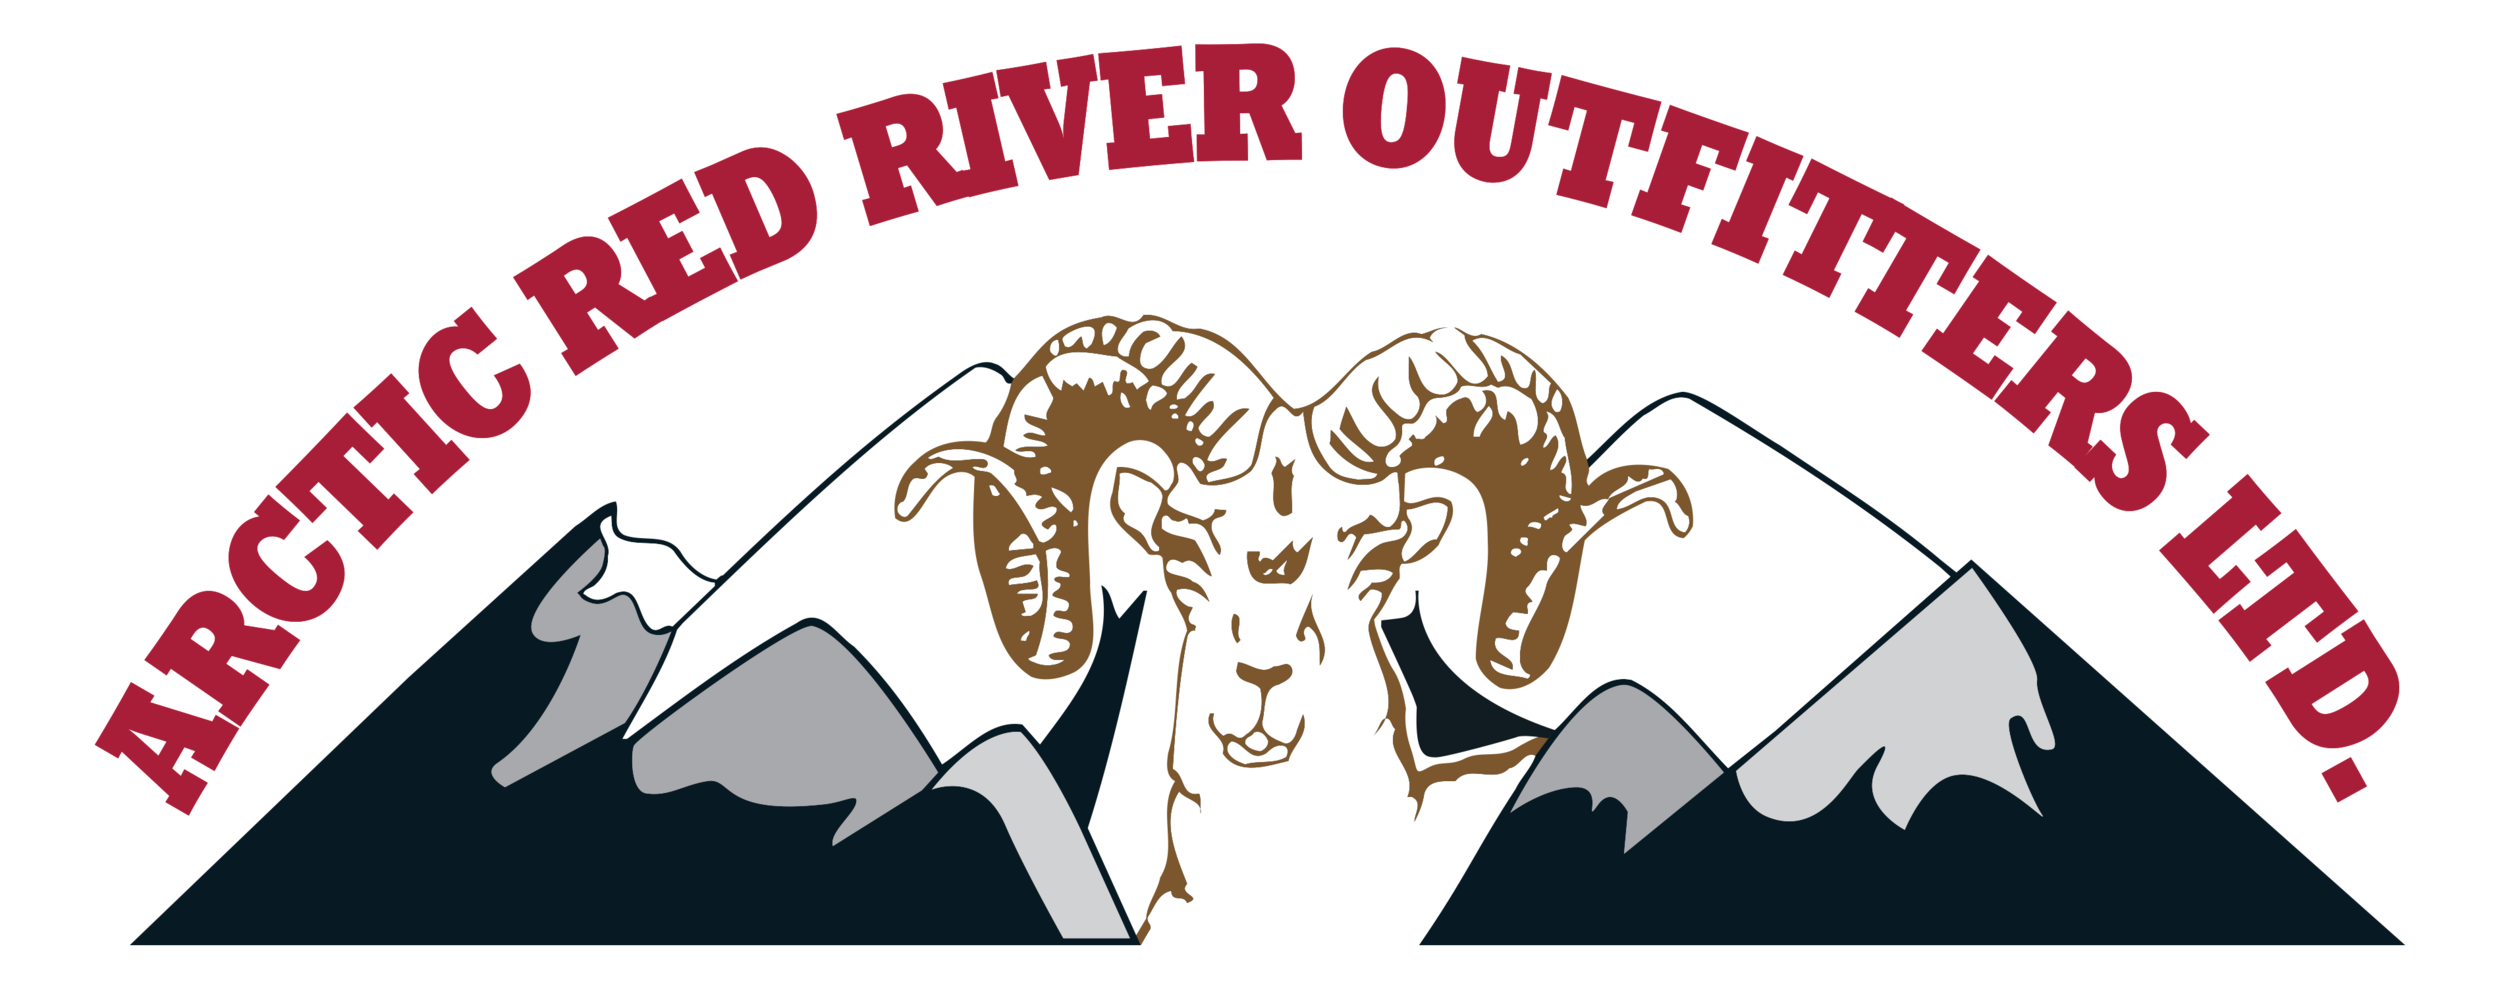 Arctic Red River Outfitters